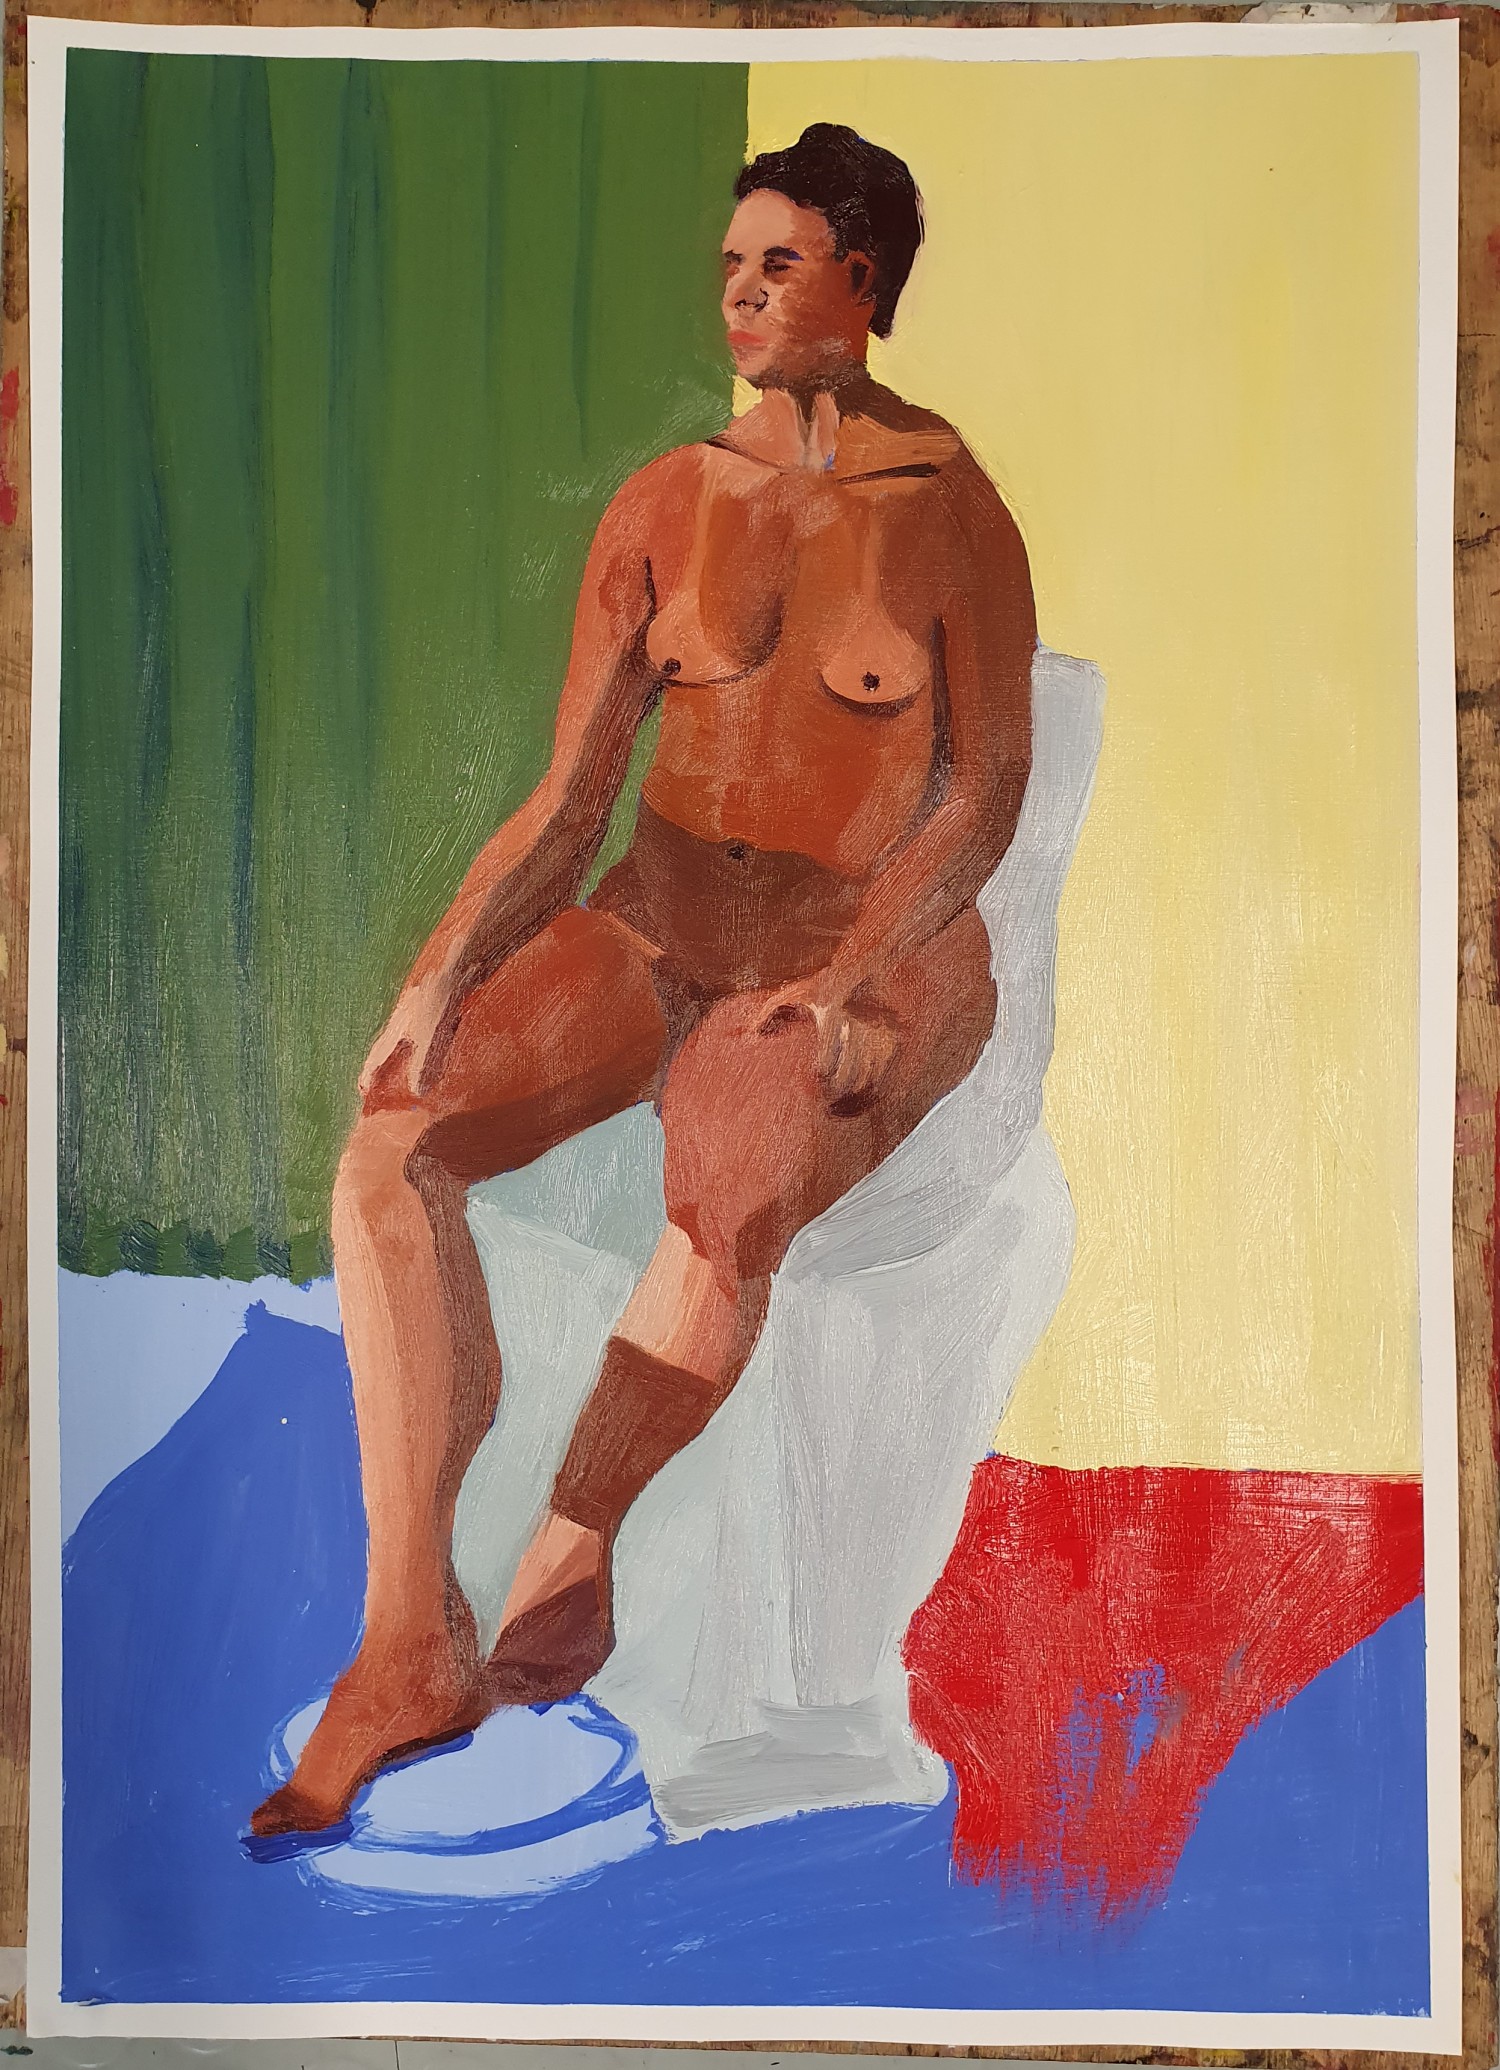 Final painting of a black woman sitting in a chair, with sideways lighting,
against a colourful background including a green curtain, a pale yellow wall,
and a bright red carpet.